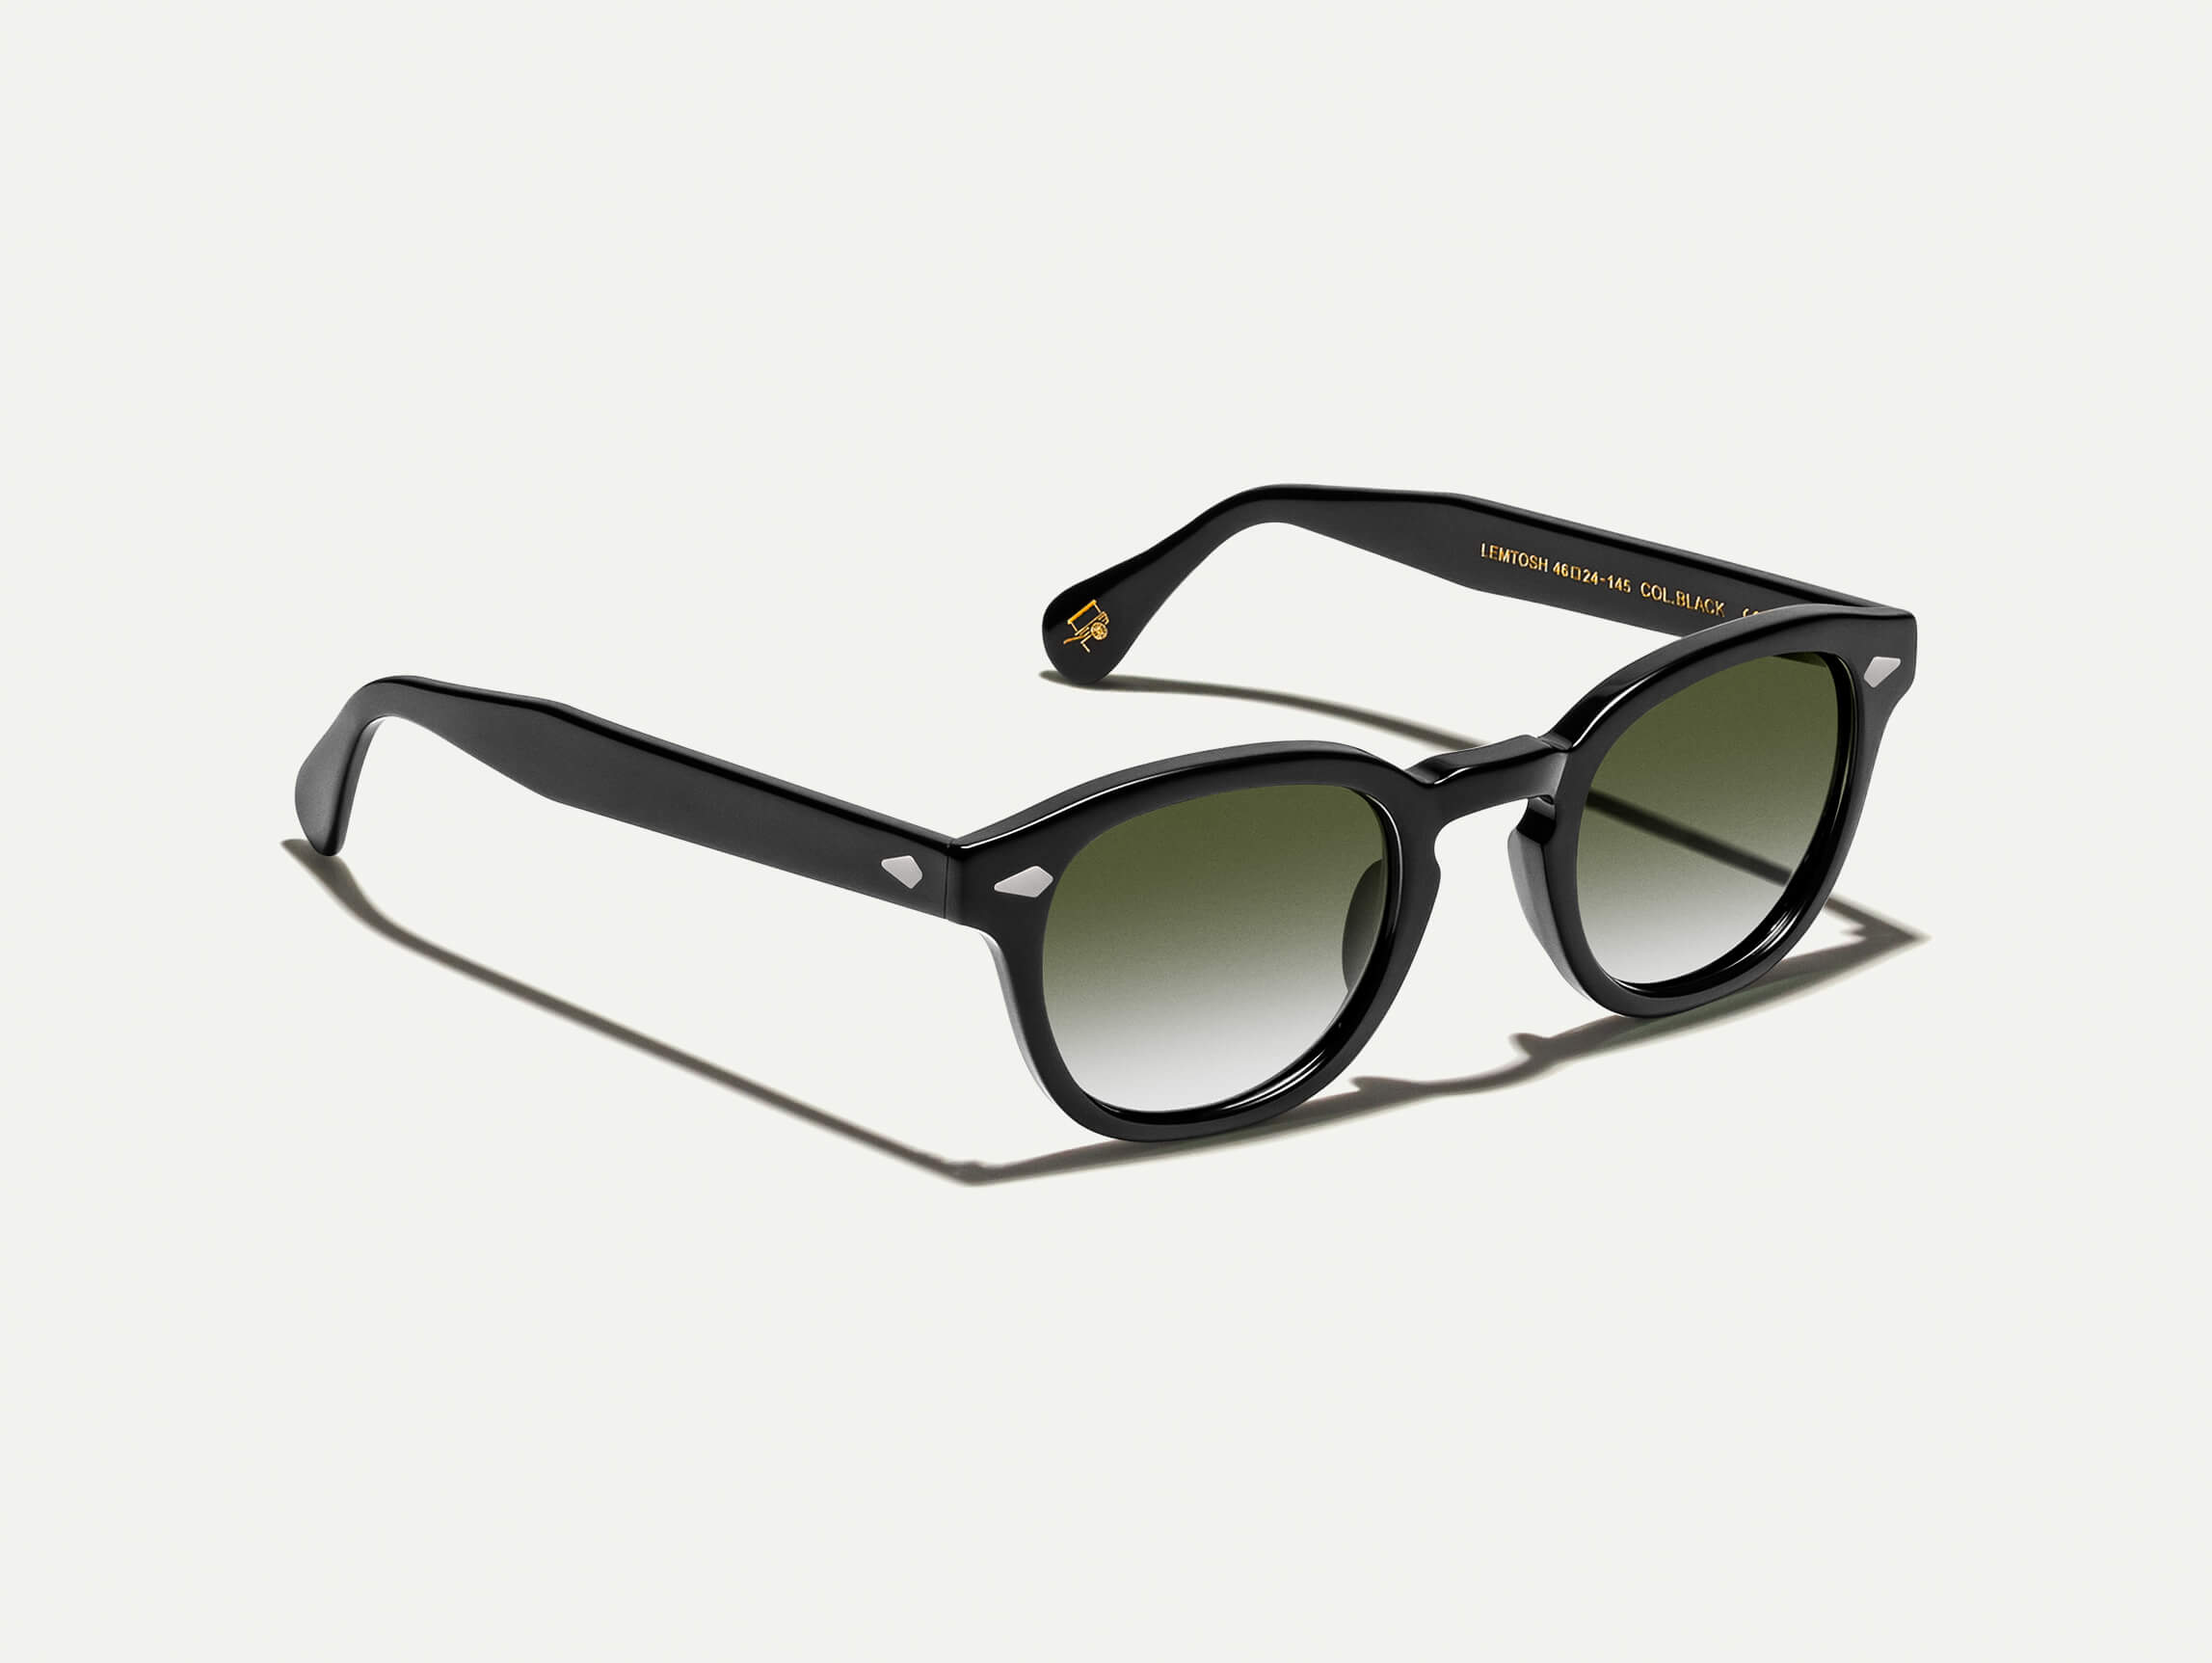 The LEMTOSH Black with G-15 Fade Tinted Lenses